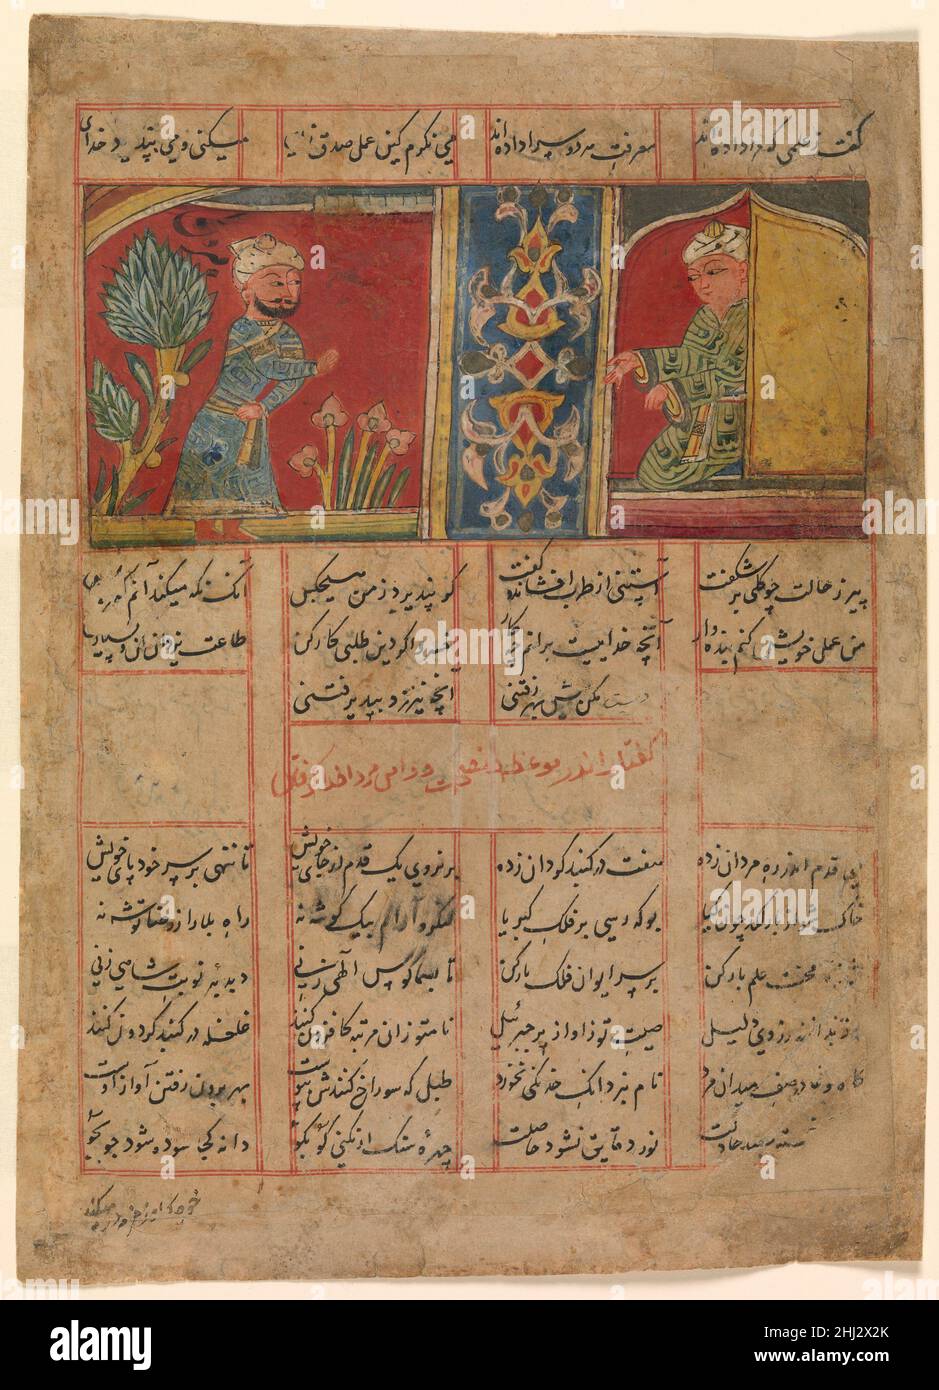 'Khizr Comes to the Ascetic's Cell', Folio from a Khamsa (Quintet) of Amir Khusrau Dihlavi ca. 1450 Amir Khusrau Dihlavi This painting illustrates an episode from a five-part poem written by Amir Khusrau Dihlavi between 1298 and 1302. In the painting, a young man named Khizr is admonished by an ascetic to be faithful and disregard the opinion of others. The page comes from a book attributed to northern India in the fifteenth century, although it displays many features of contemporary Iranian painting, such as large-scale plants and a single-color background.. 'Khizr Comes to the Ascetic's Cell Stock Photo